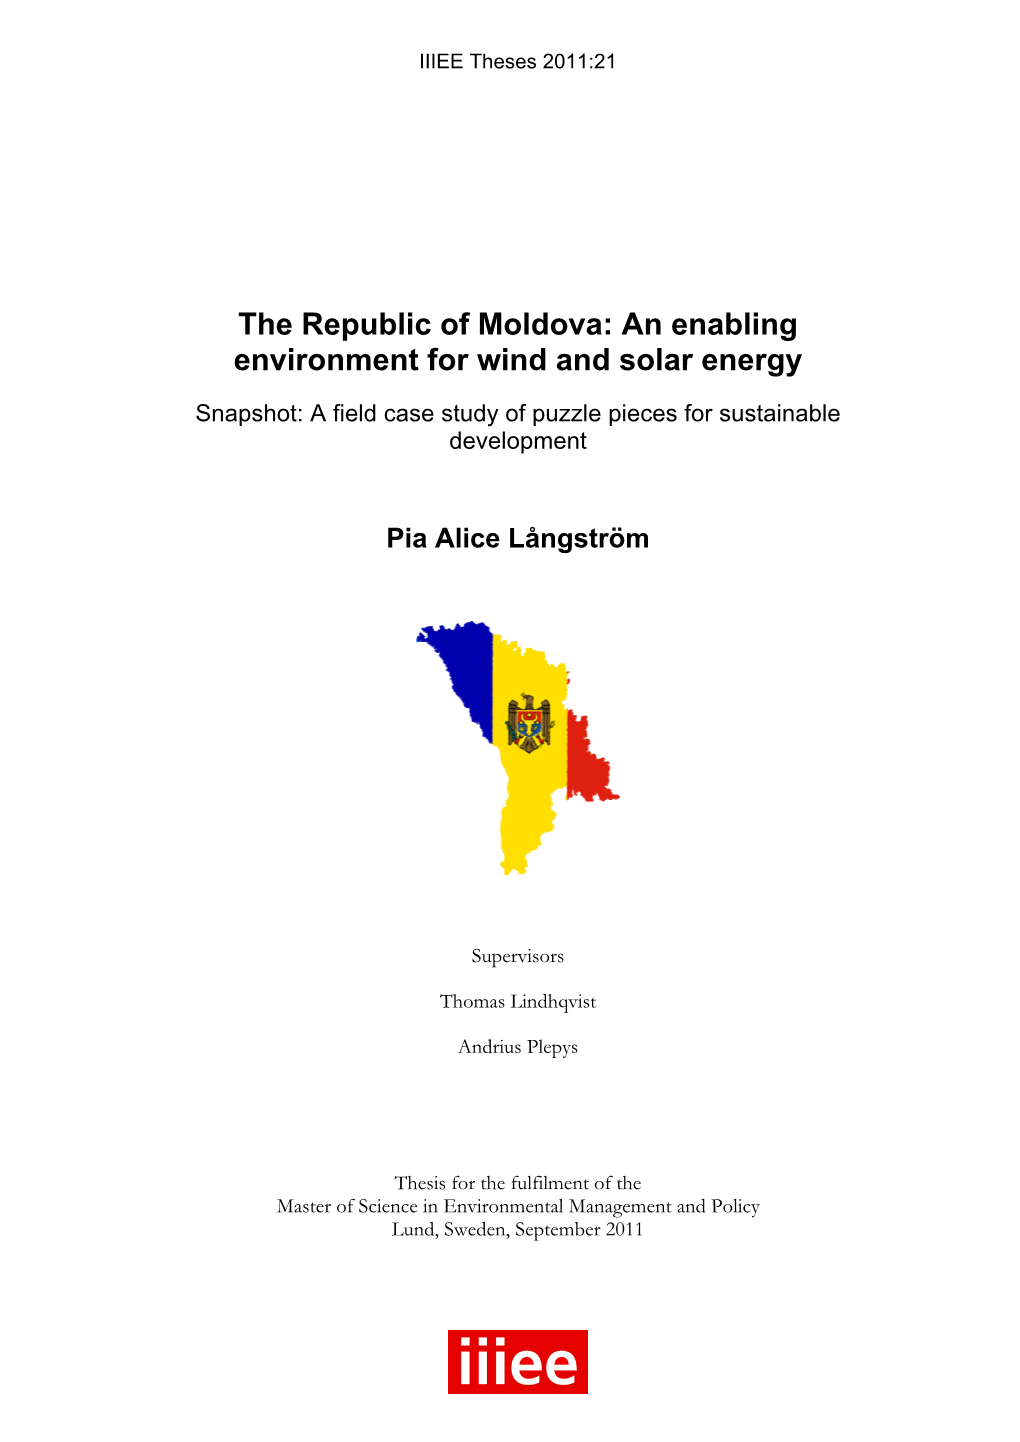 The Republic of Moldova: an Enabling Environment for Wind and Solar Energy